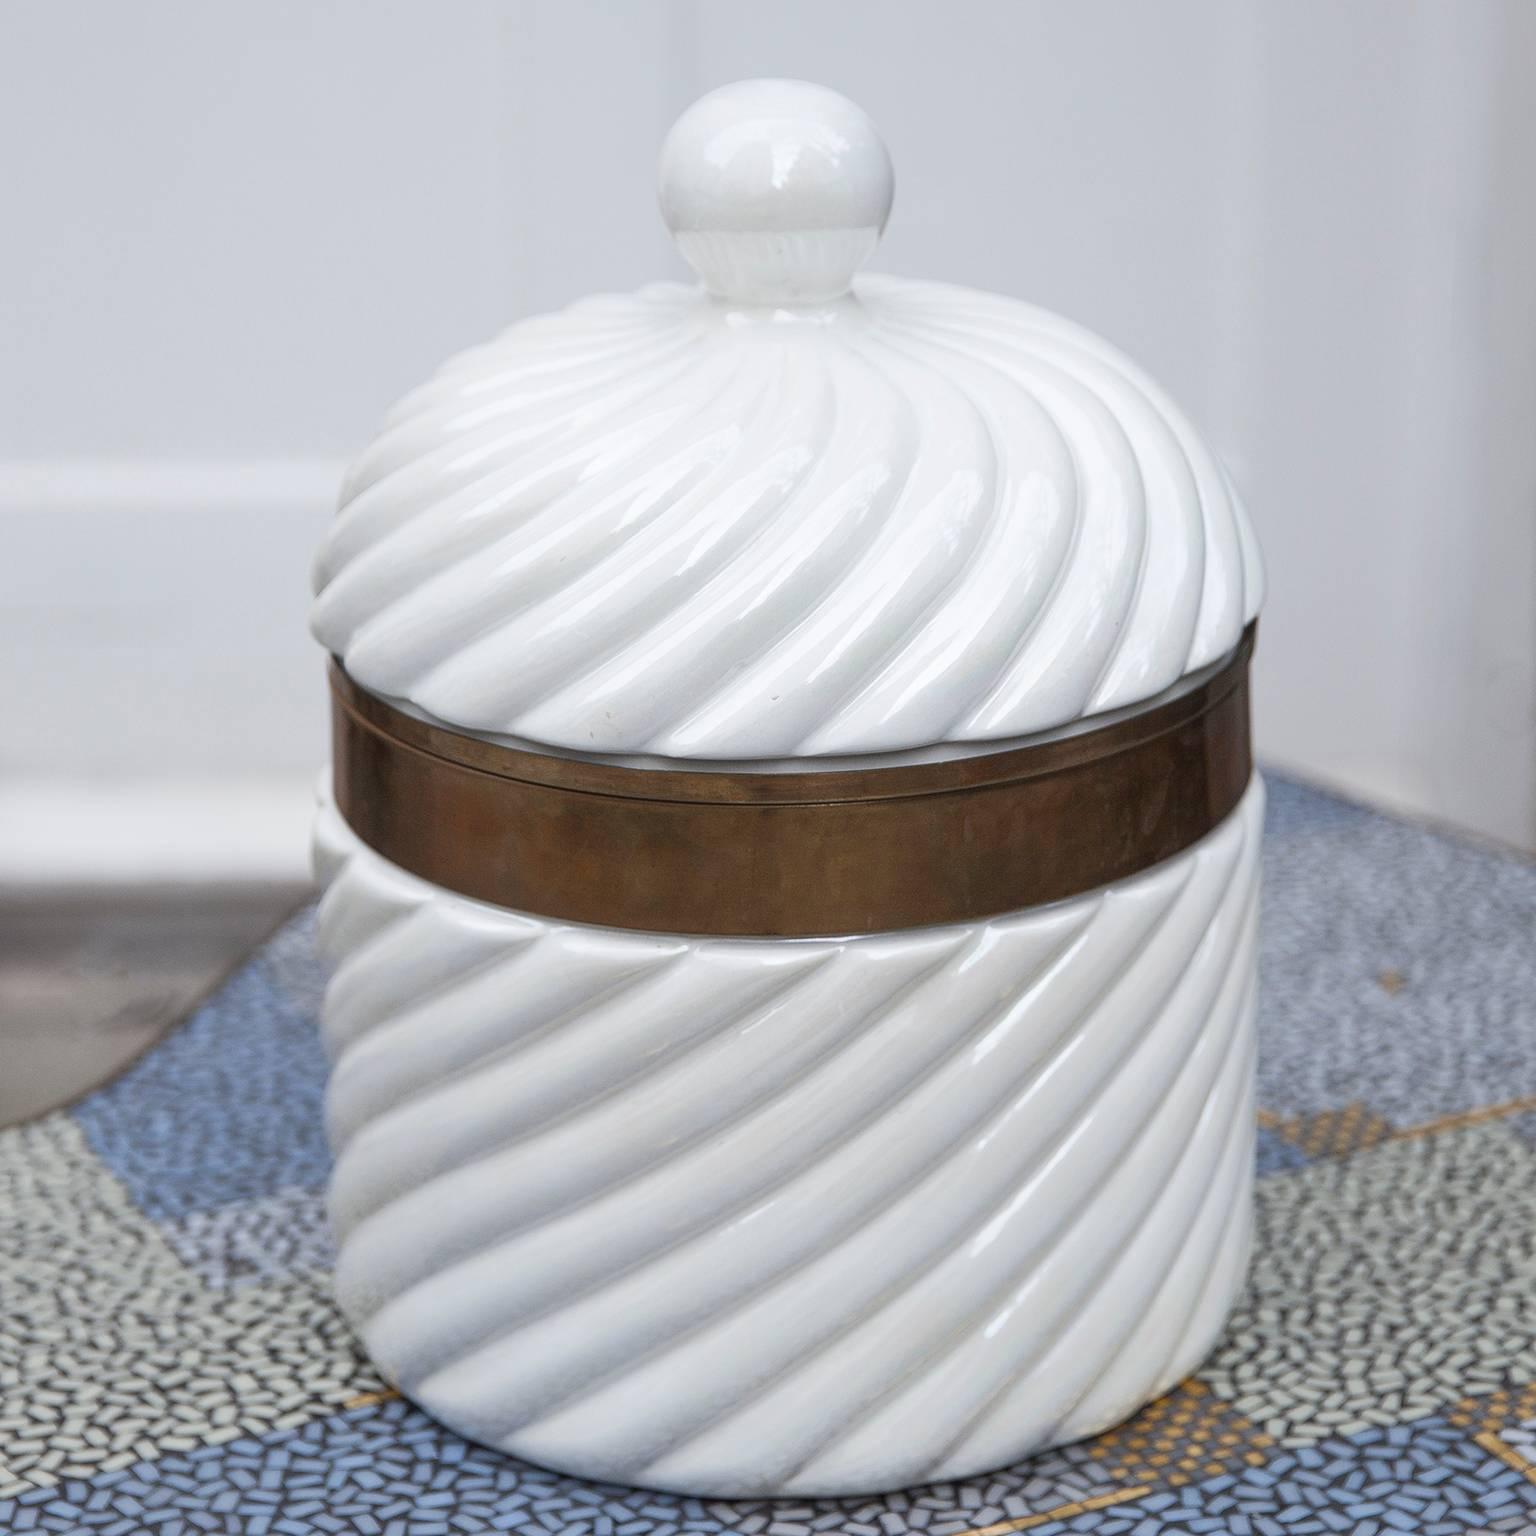 Wonderful porcelain ice bucket by the Italian Designer Tommaso Barbi in white color. The brass ring and the porcelain is in excellent condition. The size of this piece gives great presence, a statement for Hollywood Regency style.
Signed on the